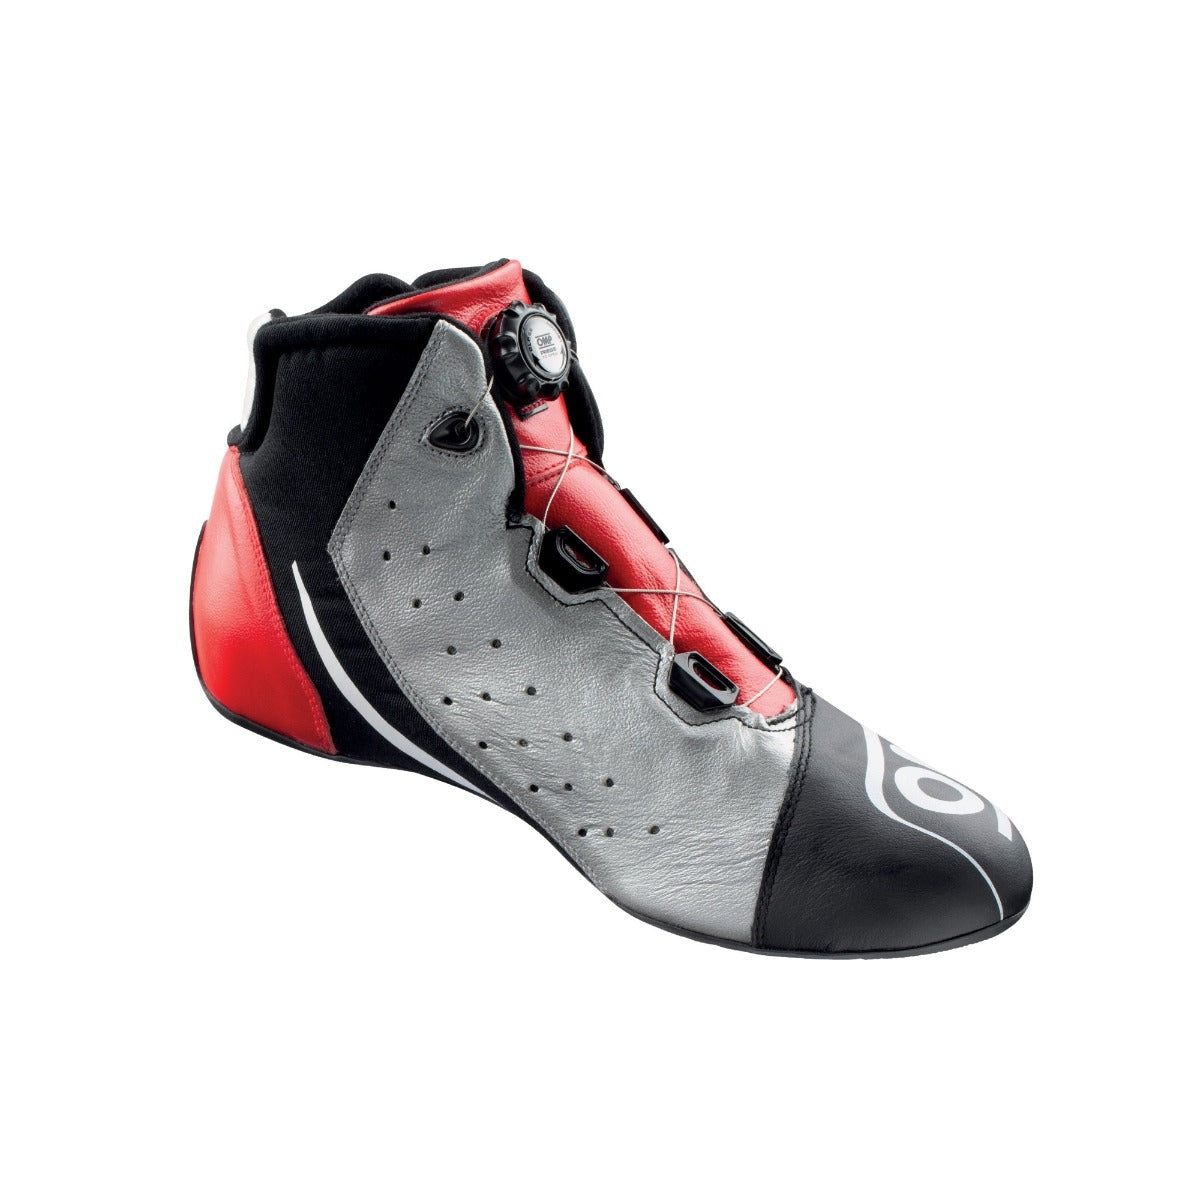 OMP One Evo X R Nomex Race Shoe in black red and silver